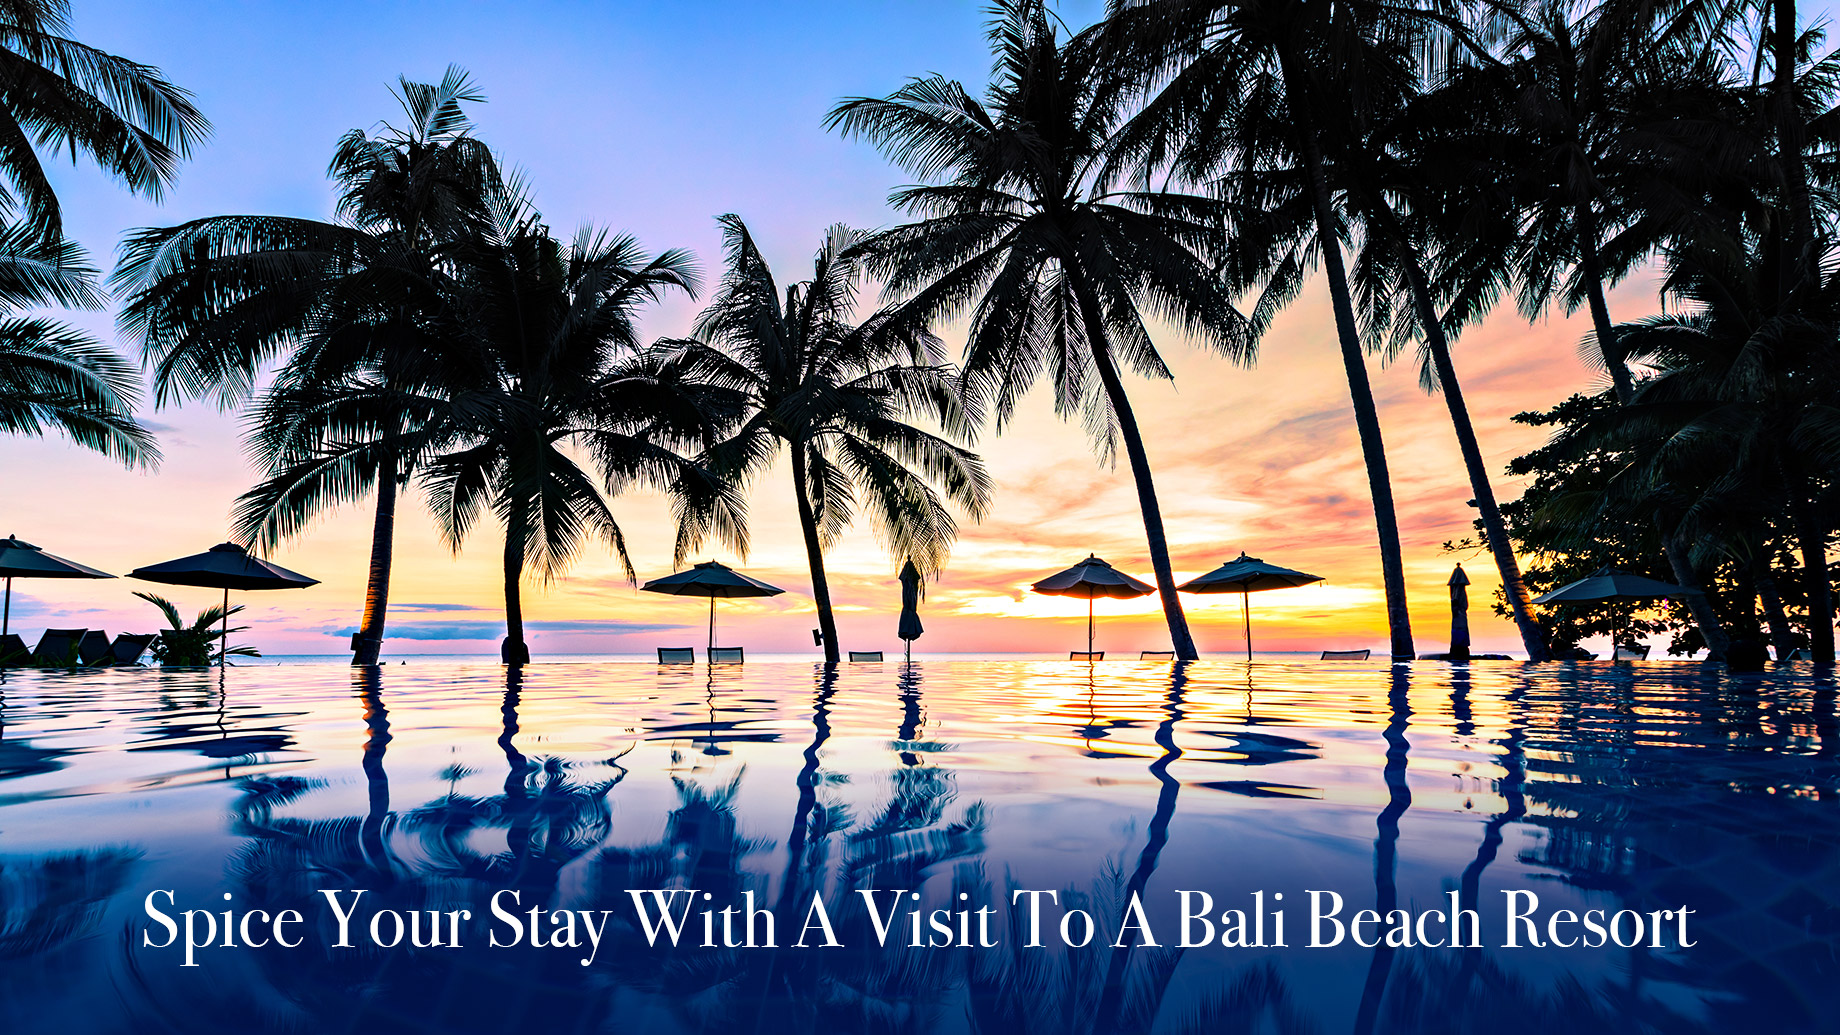 Spice Your Stay With A Visit To A Bali Beach Resort